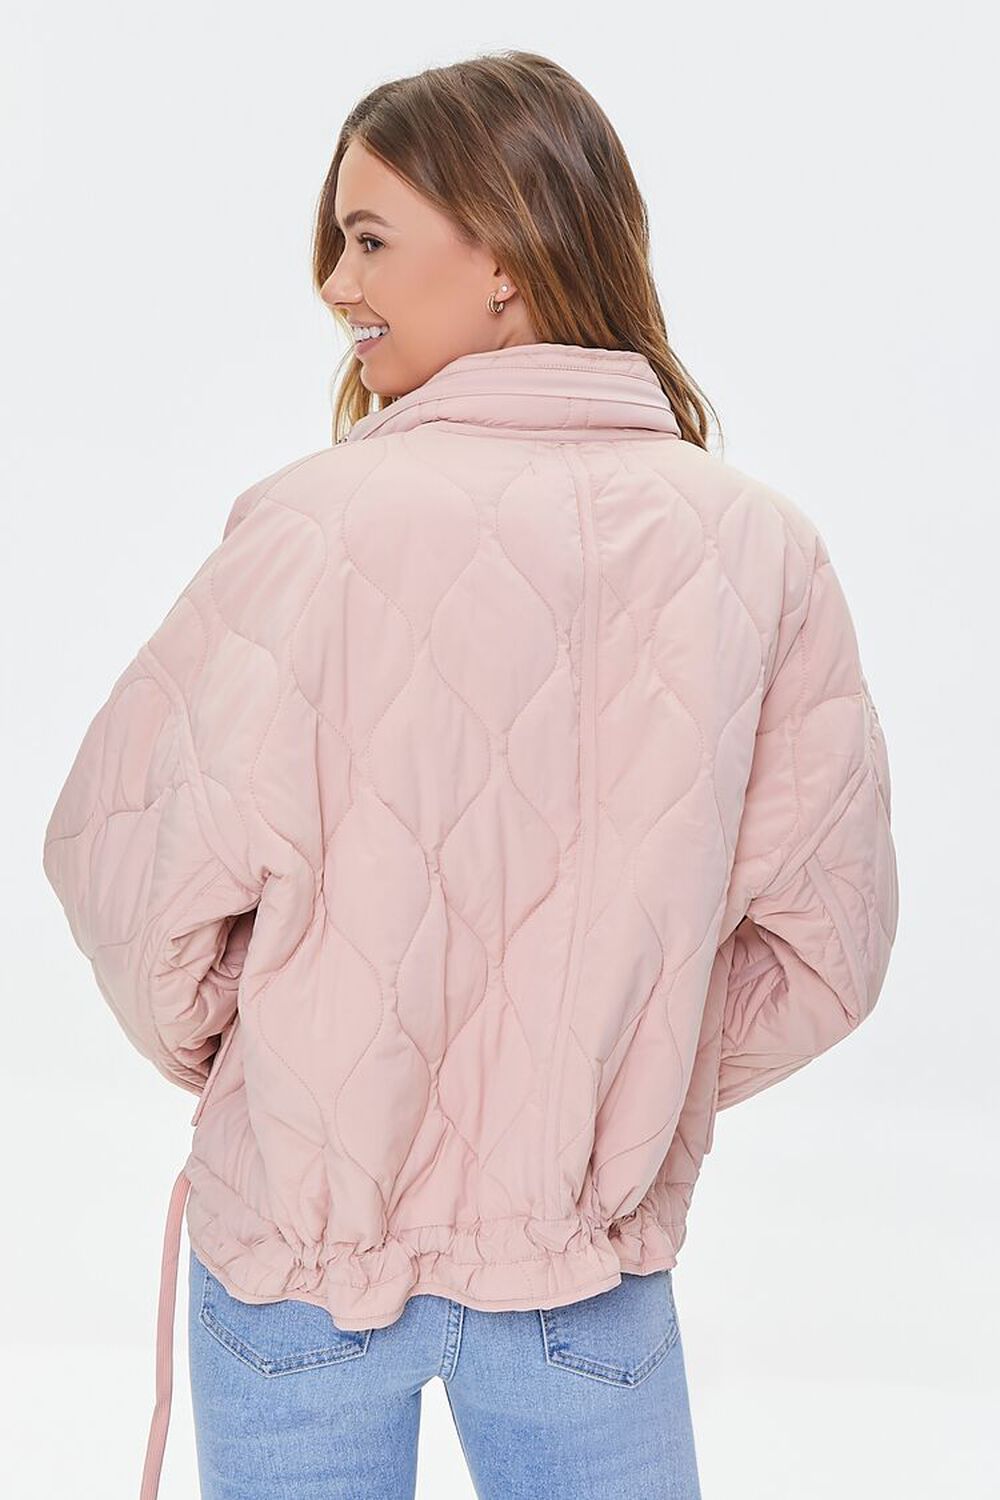 SEASHELL PINK Quilted Zip-Up Jacket, image 3